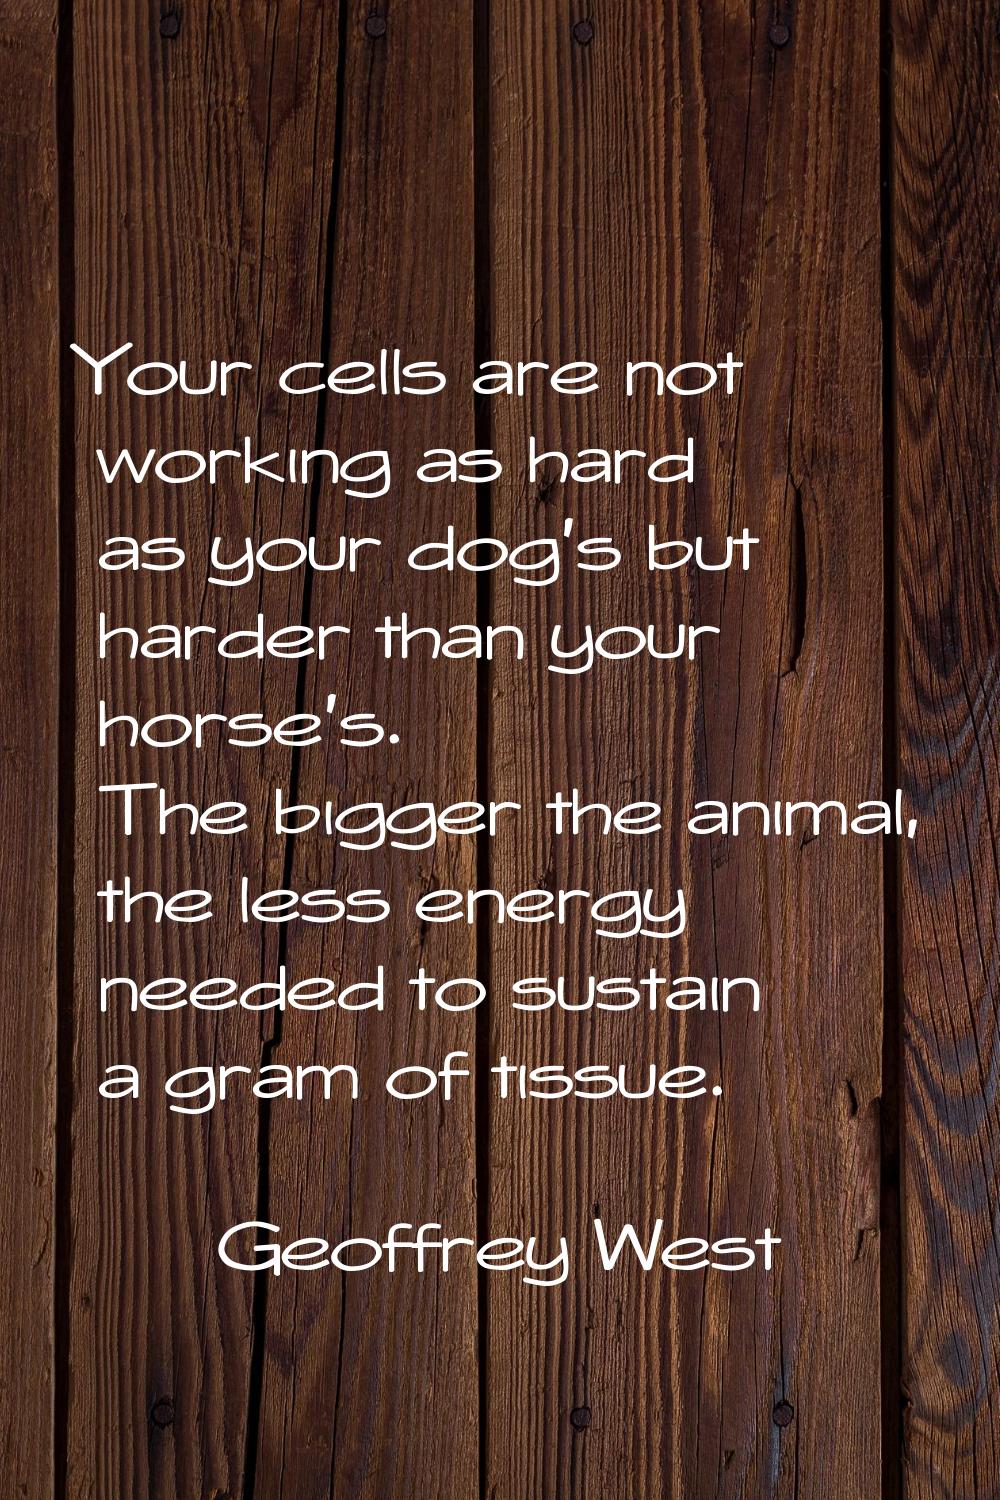 Your cells are not working as hard as your dog's but harder than your horse's. The bigger the anima